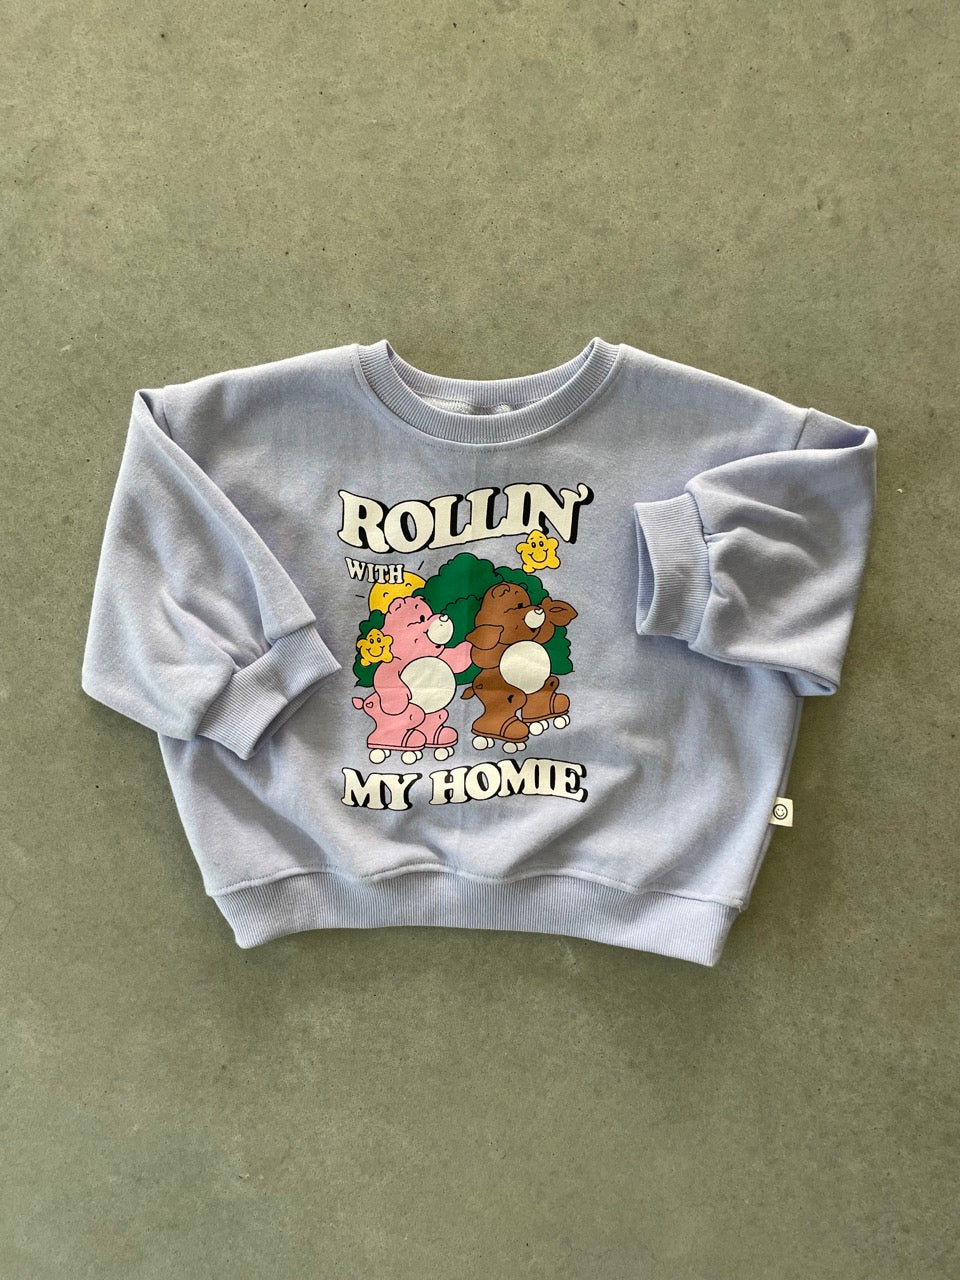 Rollin' with my homie sweater